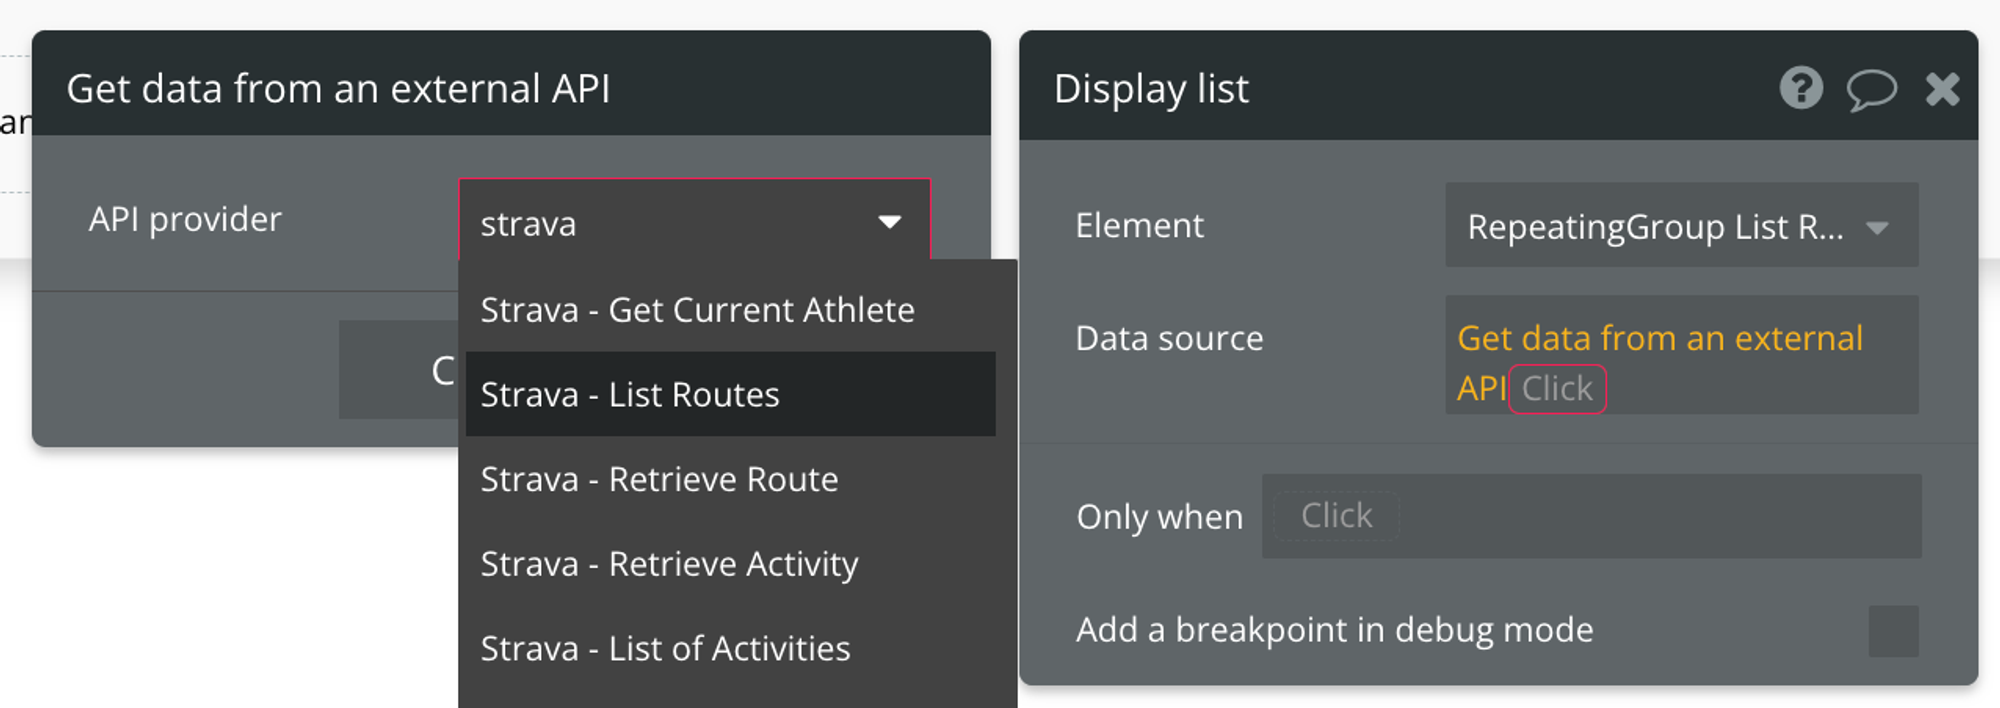 Select "Get data from external API" from the list of data sources, then find Strava - List Routes from the list of API providers